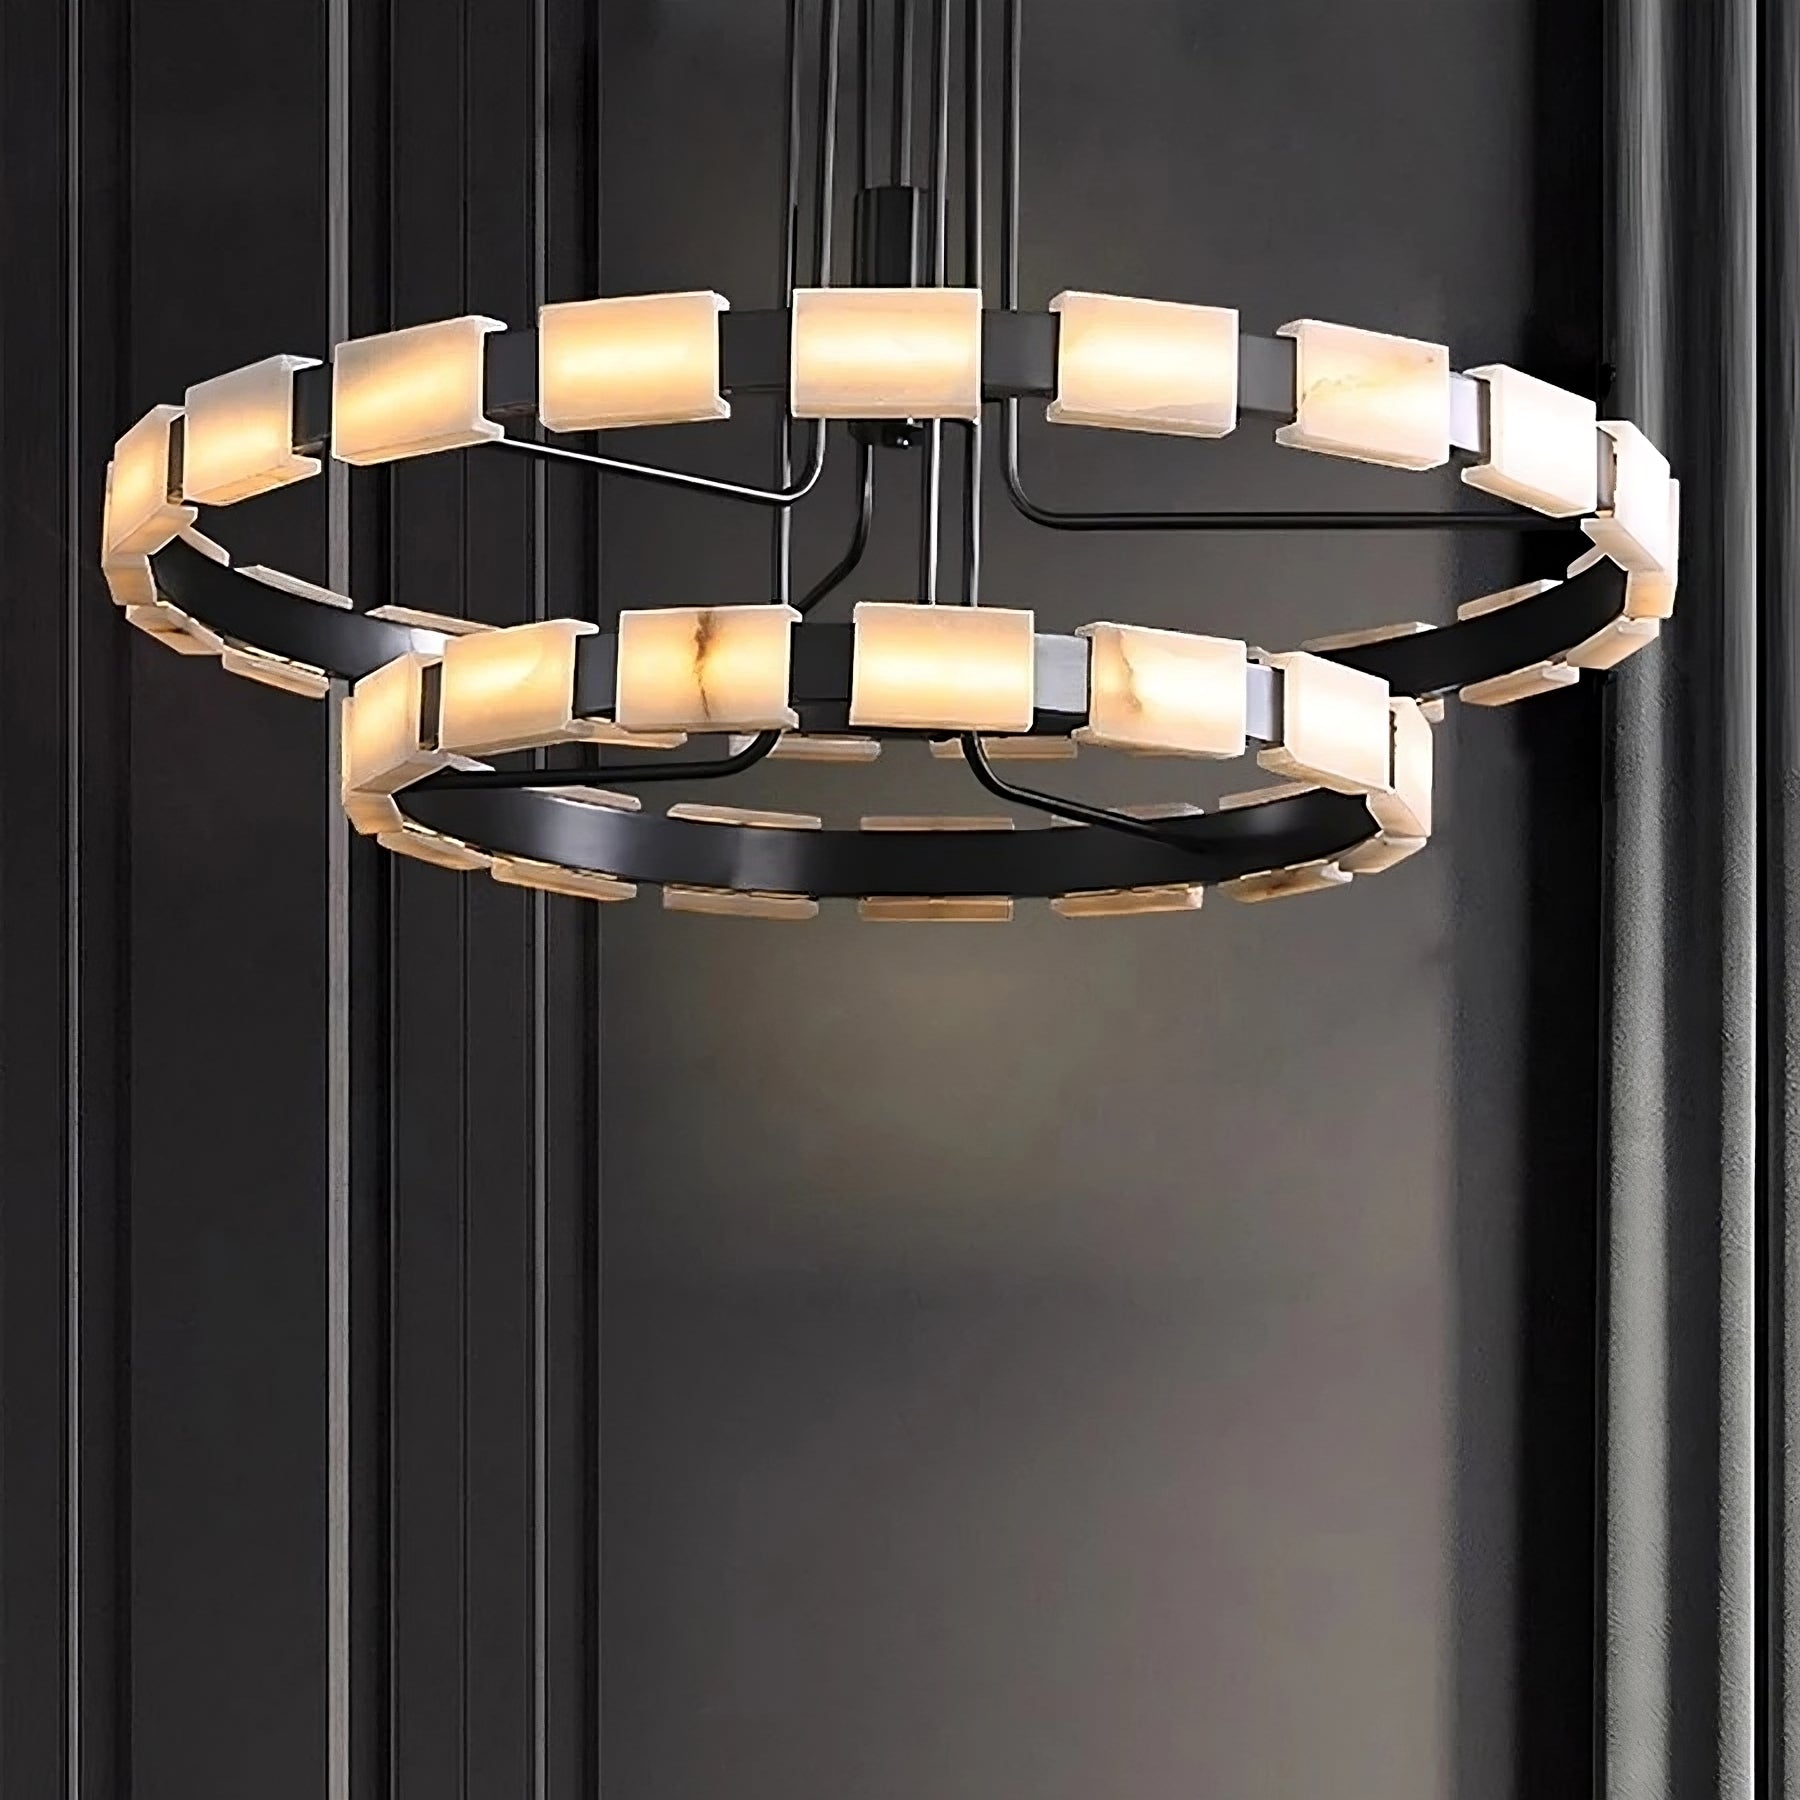 A modern chandelier with a black metal frame featuring two circular tiers adorned with rectangular frosted light panels. The Morsale.com Villa Marble Mid-Century Modern Chandelier's geometric design contrasts against a sleek, dark wall, creating a sophisticated and contemporary look.